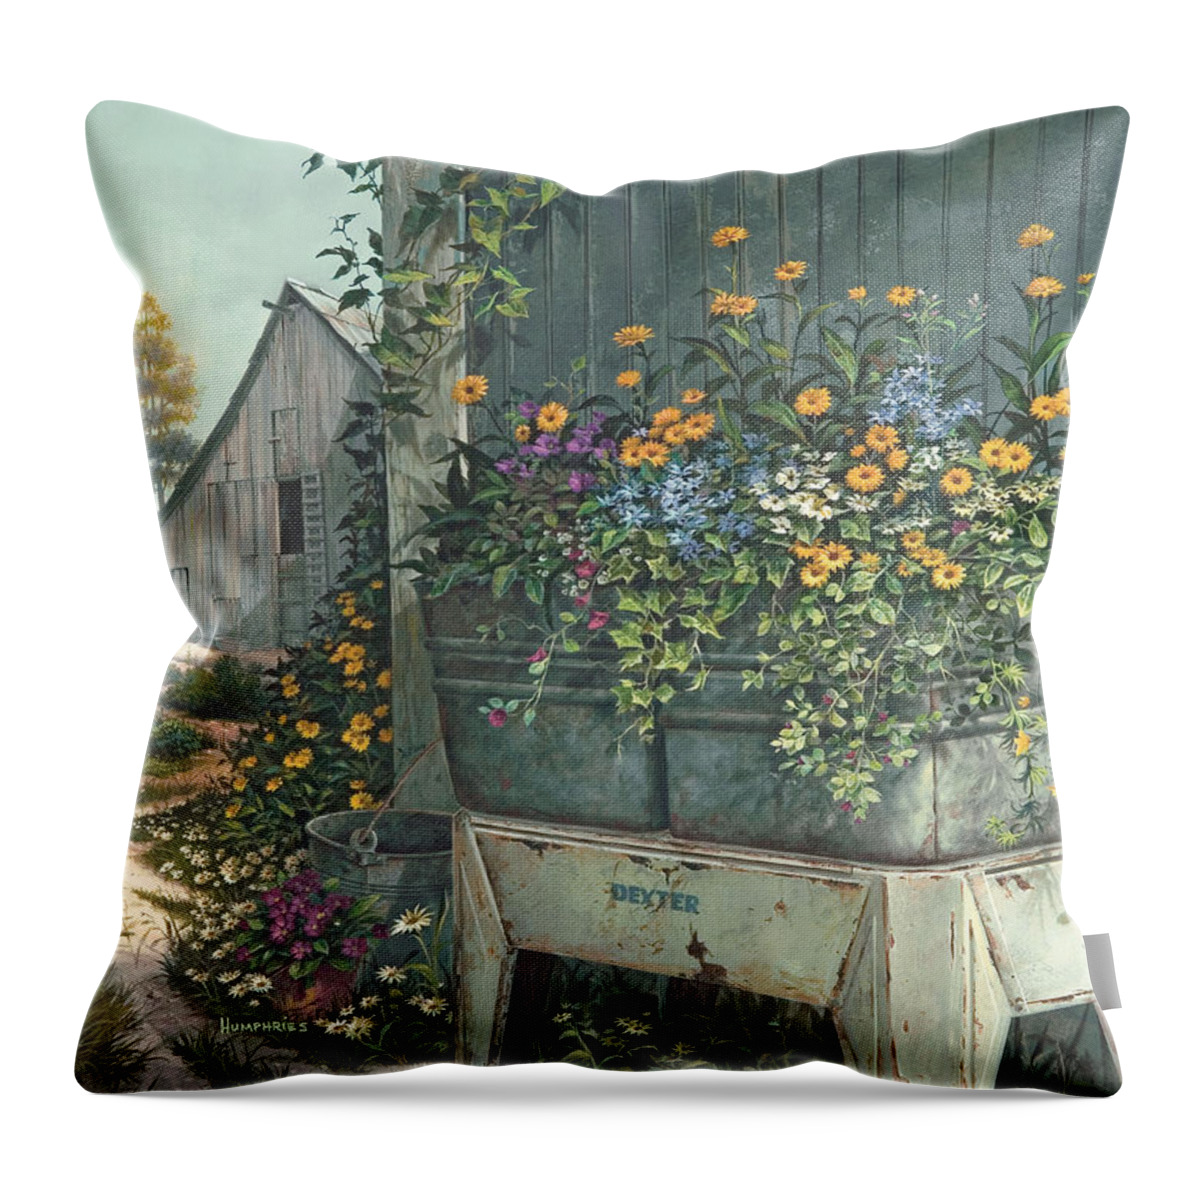 Michael Humphries Throw Pillow featuring the painting Hidden Treasures by Michael Humphries